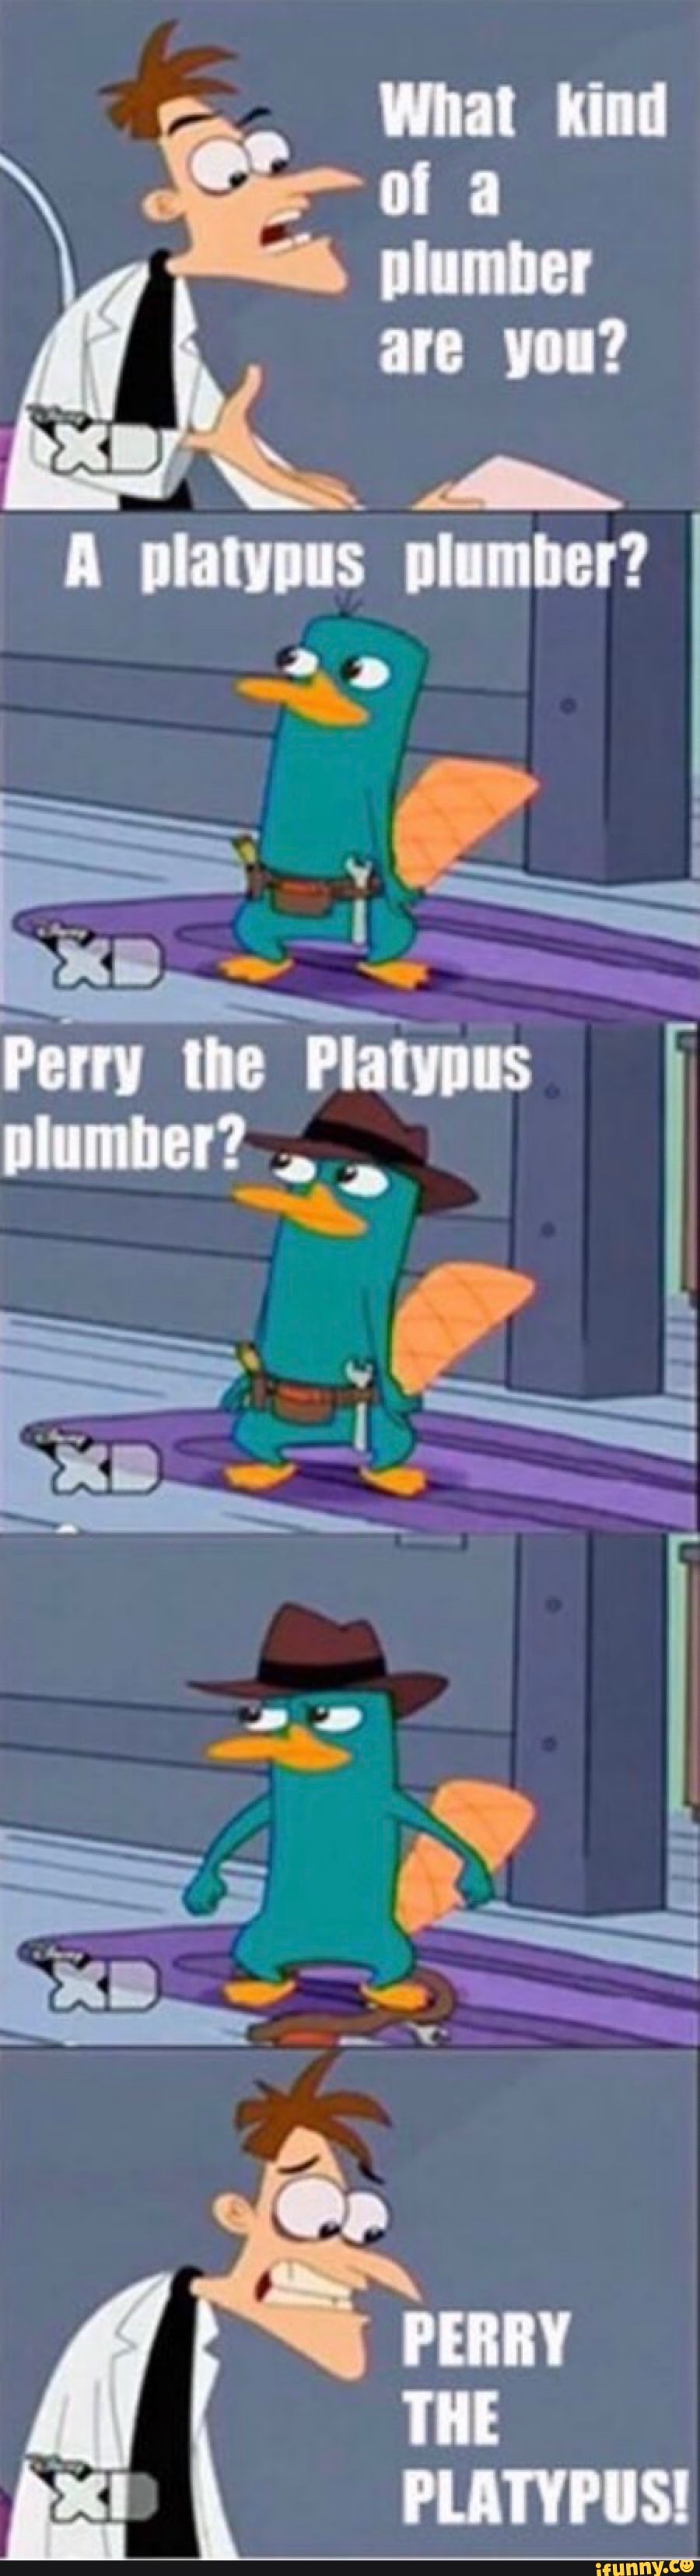 Perry the platypus plumber